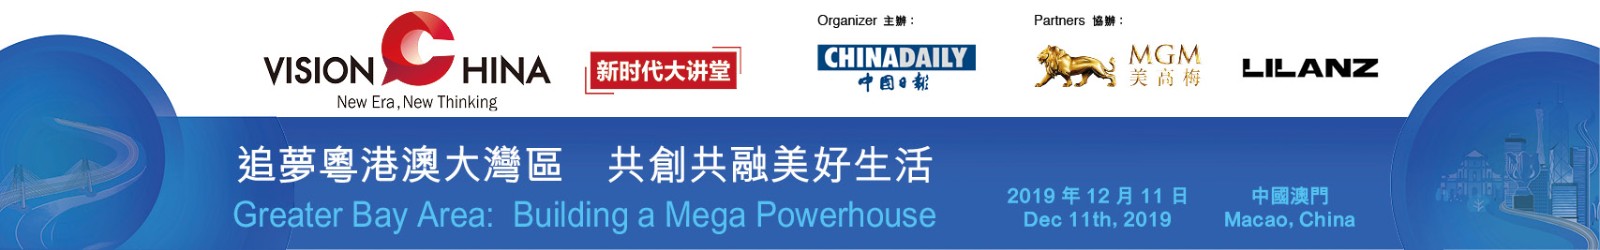 Vision China: "Greater Bay Area: Building a Mega Powerhouse"